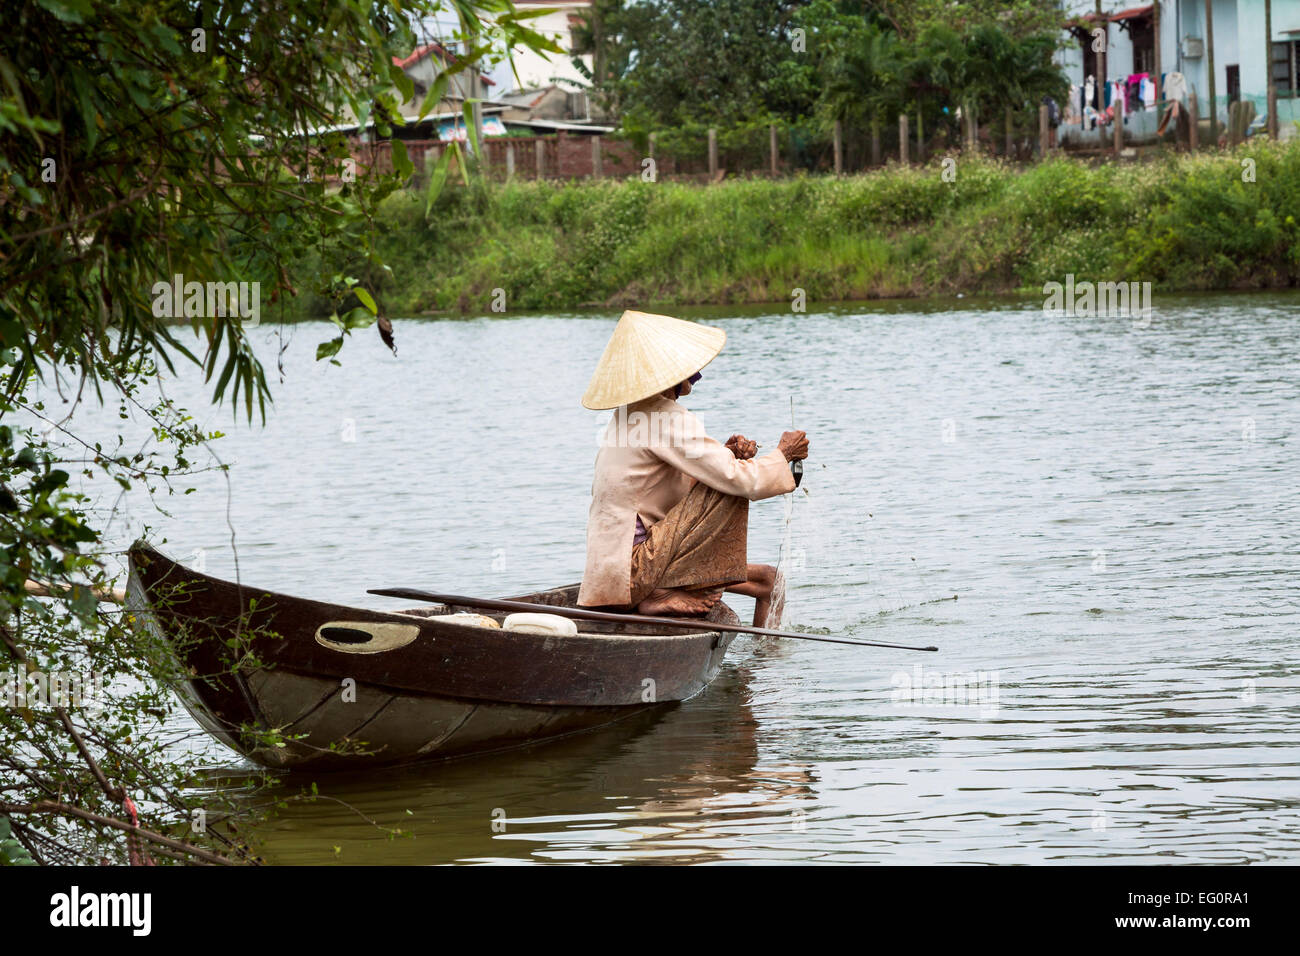 Traditionally dressed old woman fishing from her small fishing boat, Hoi An, Vietnam, Indochina, Southeast Asia, Asia Stock Photo